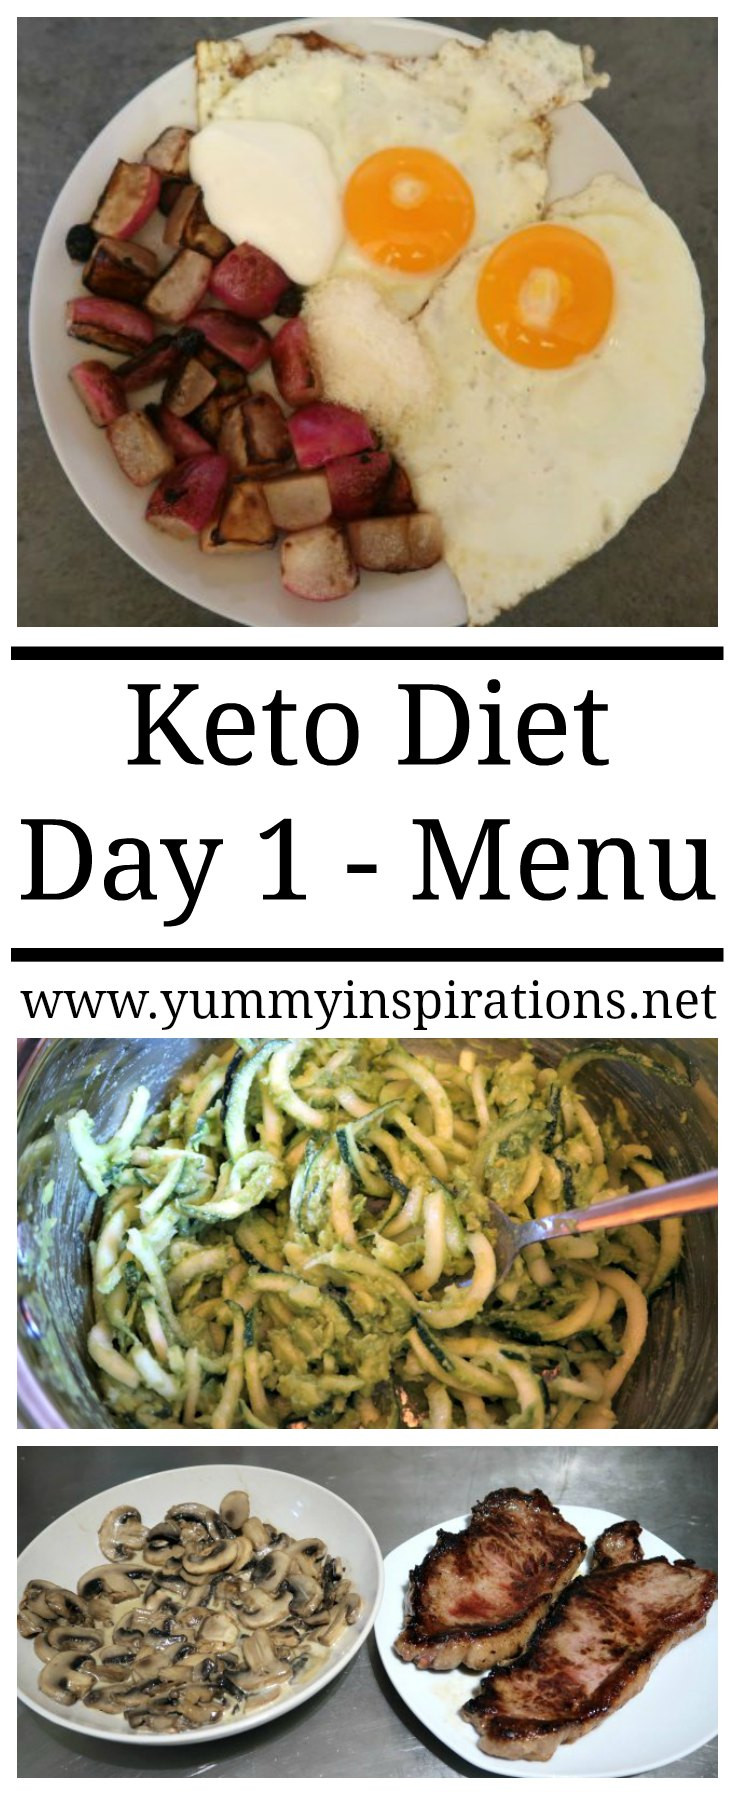 Keto Dinner For One
 Keto Day 1 Meal Plan Menu & Video Diary Day e